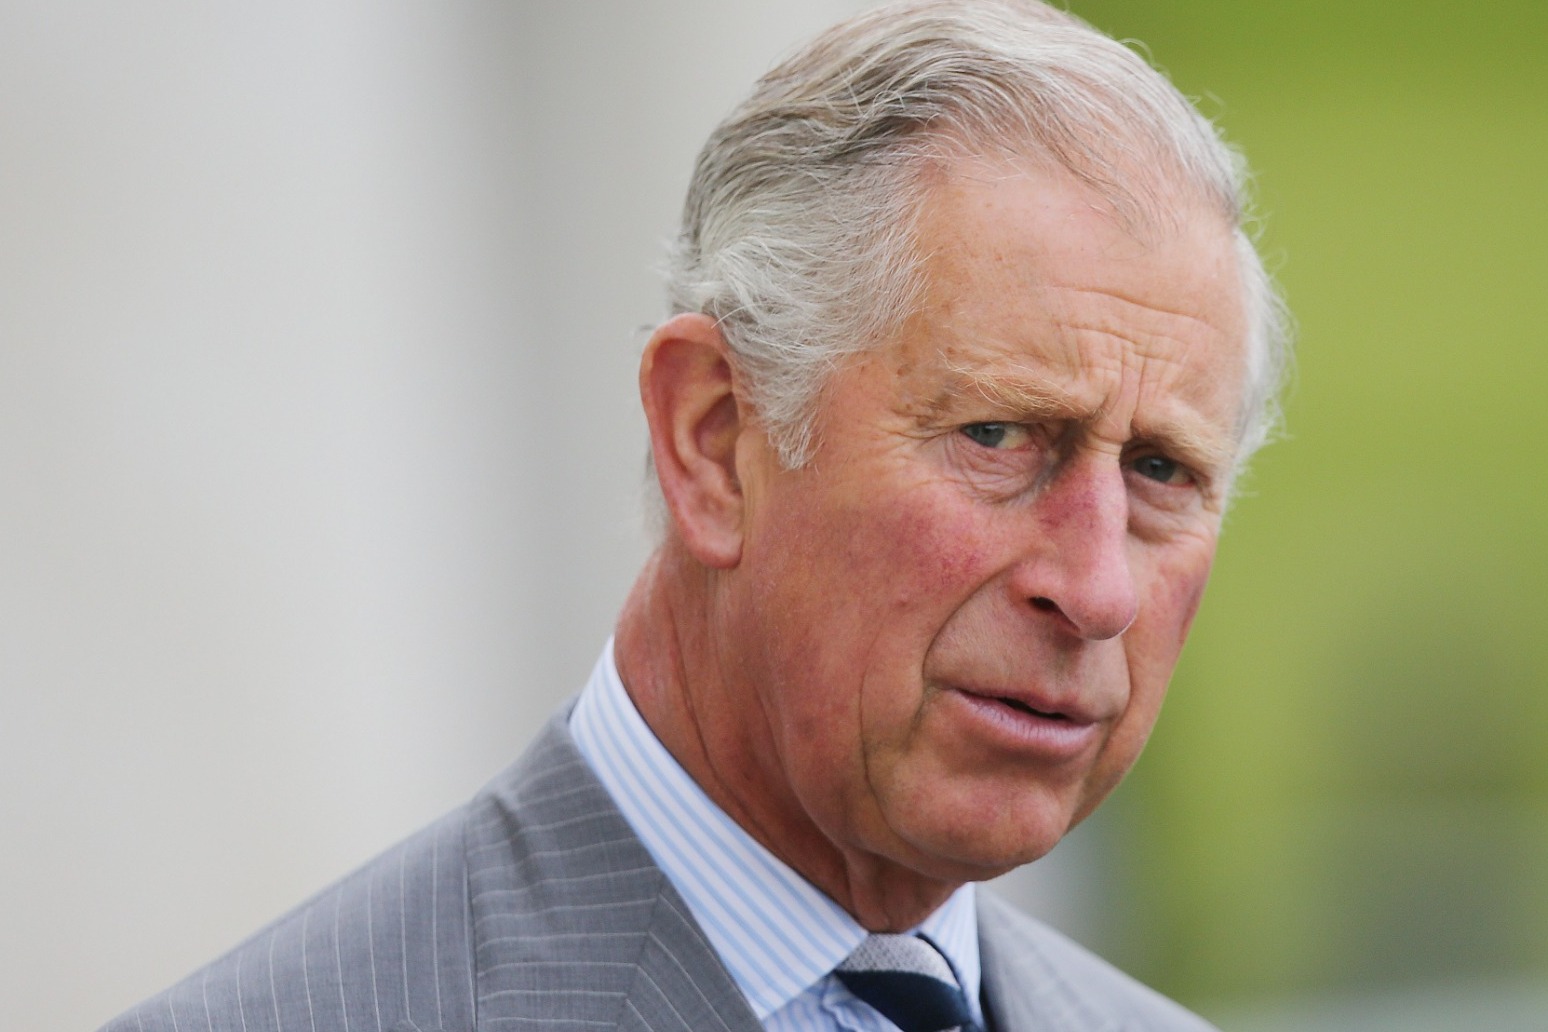 Prince of Wales ‘enormously impressed’ by teachers’ efforts during pandemic 